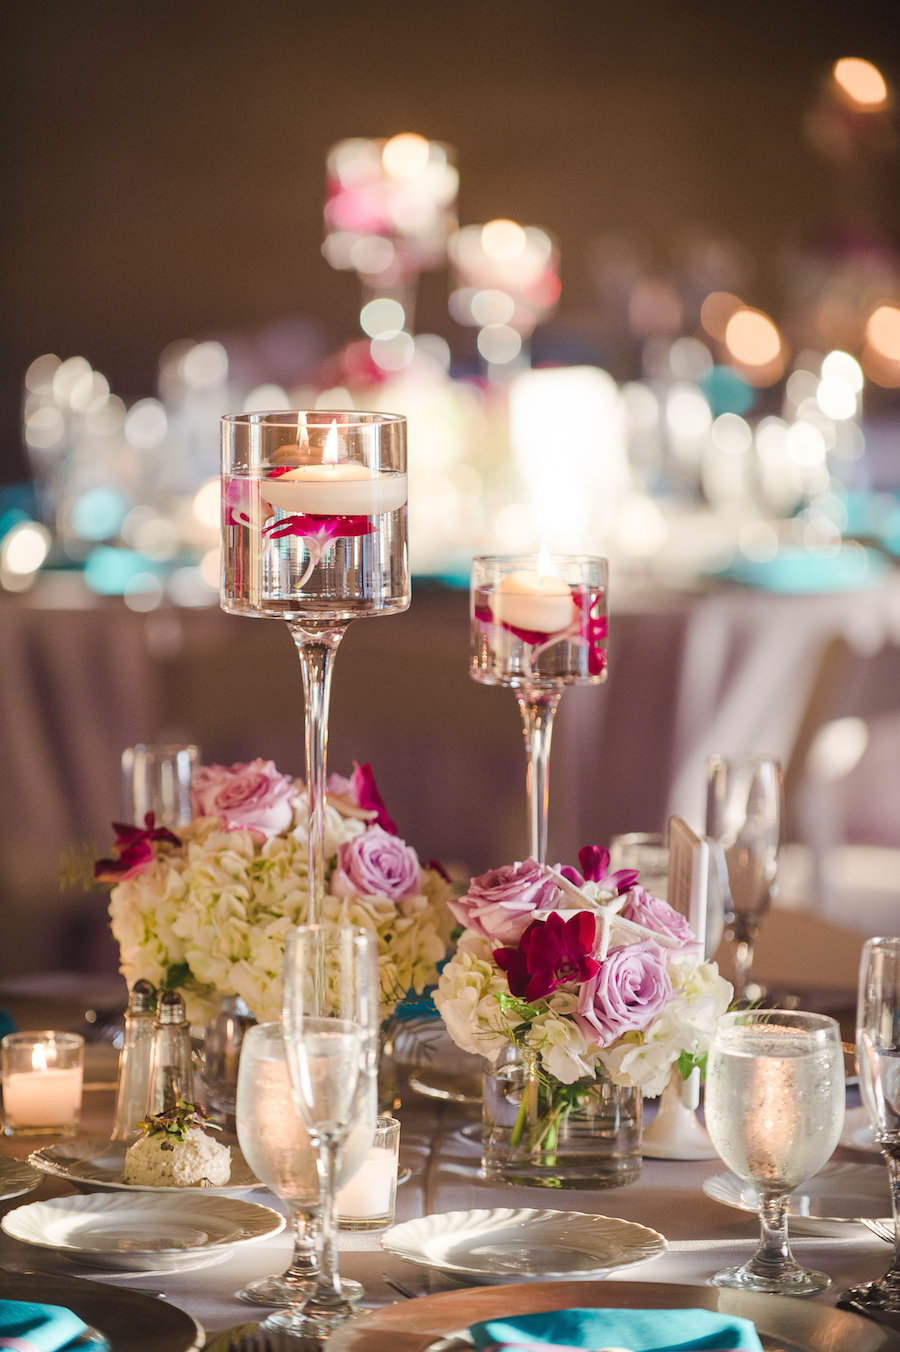 Wedding Reception with Fuchsia, Lavender, and Turquoise Centerpieces with Floating Tea Light Candles on Grey Silver Linens | Sarasota Wedding Planner UNIQUE Weddings and Events | Linens Rentals by Connie Duglin